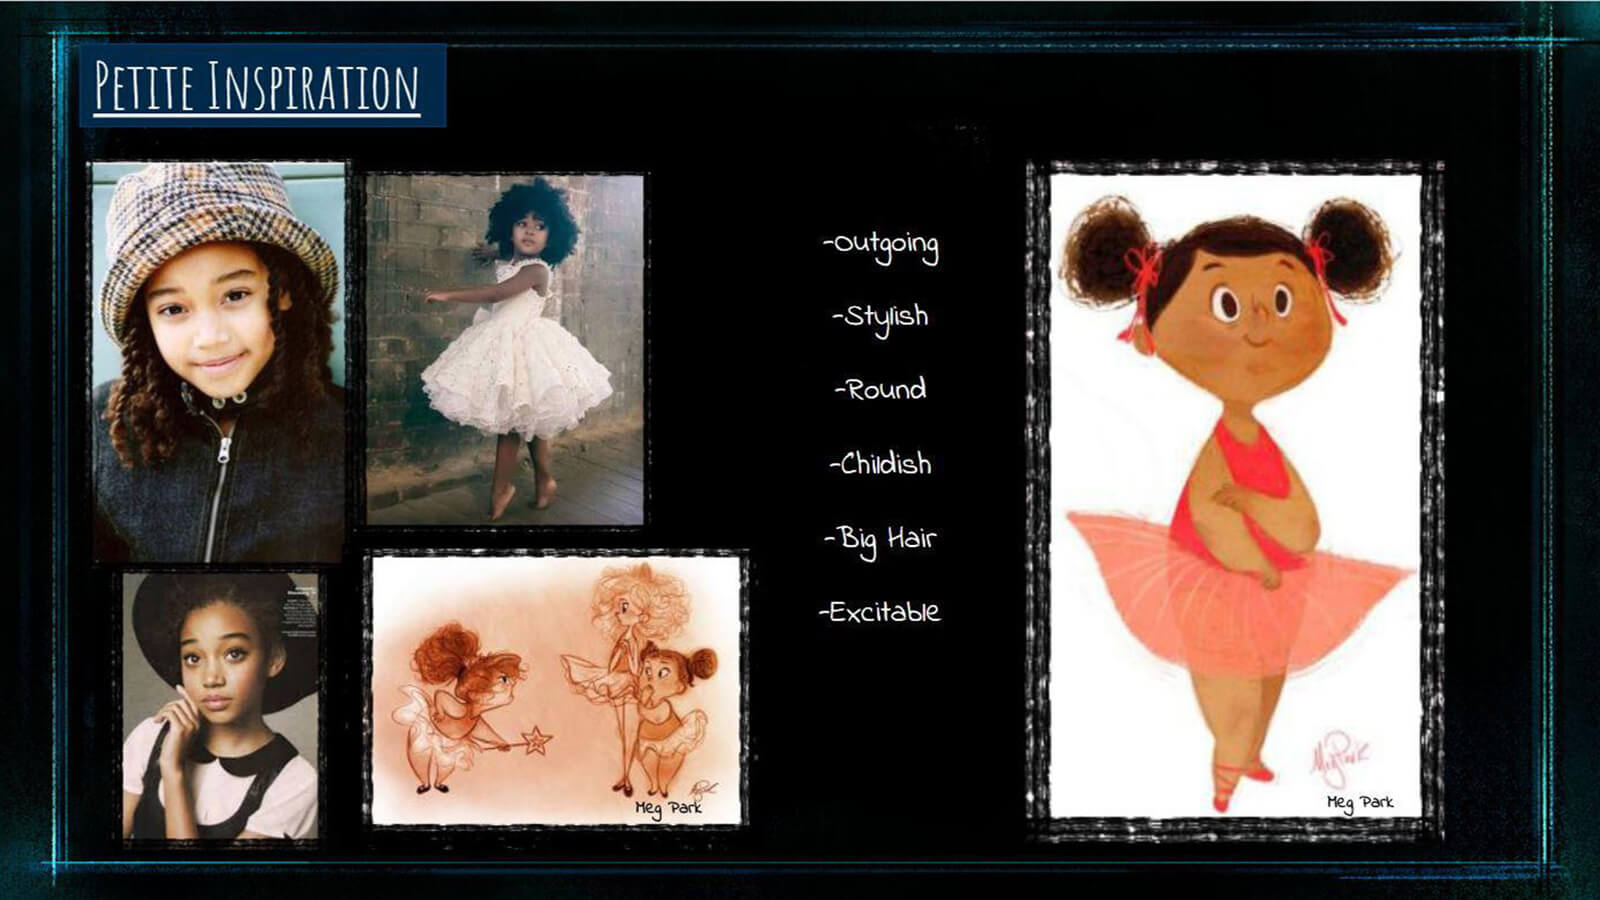 An inspiration board for the look and feel of the film's young girl character "Petite."